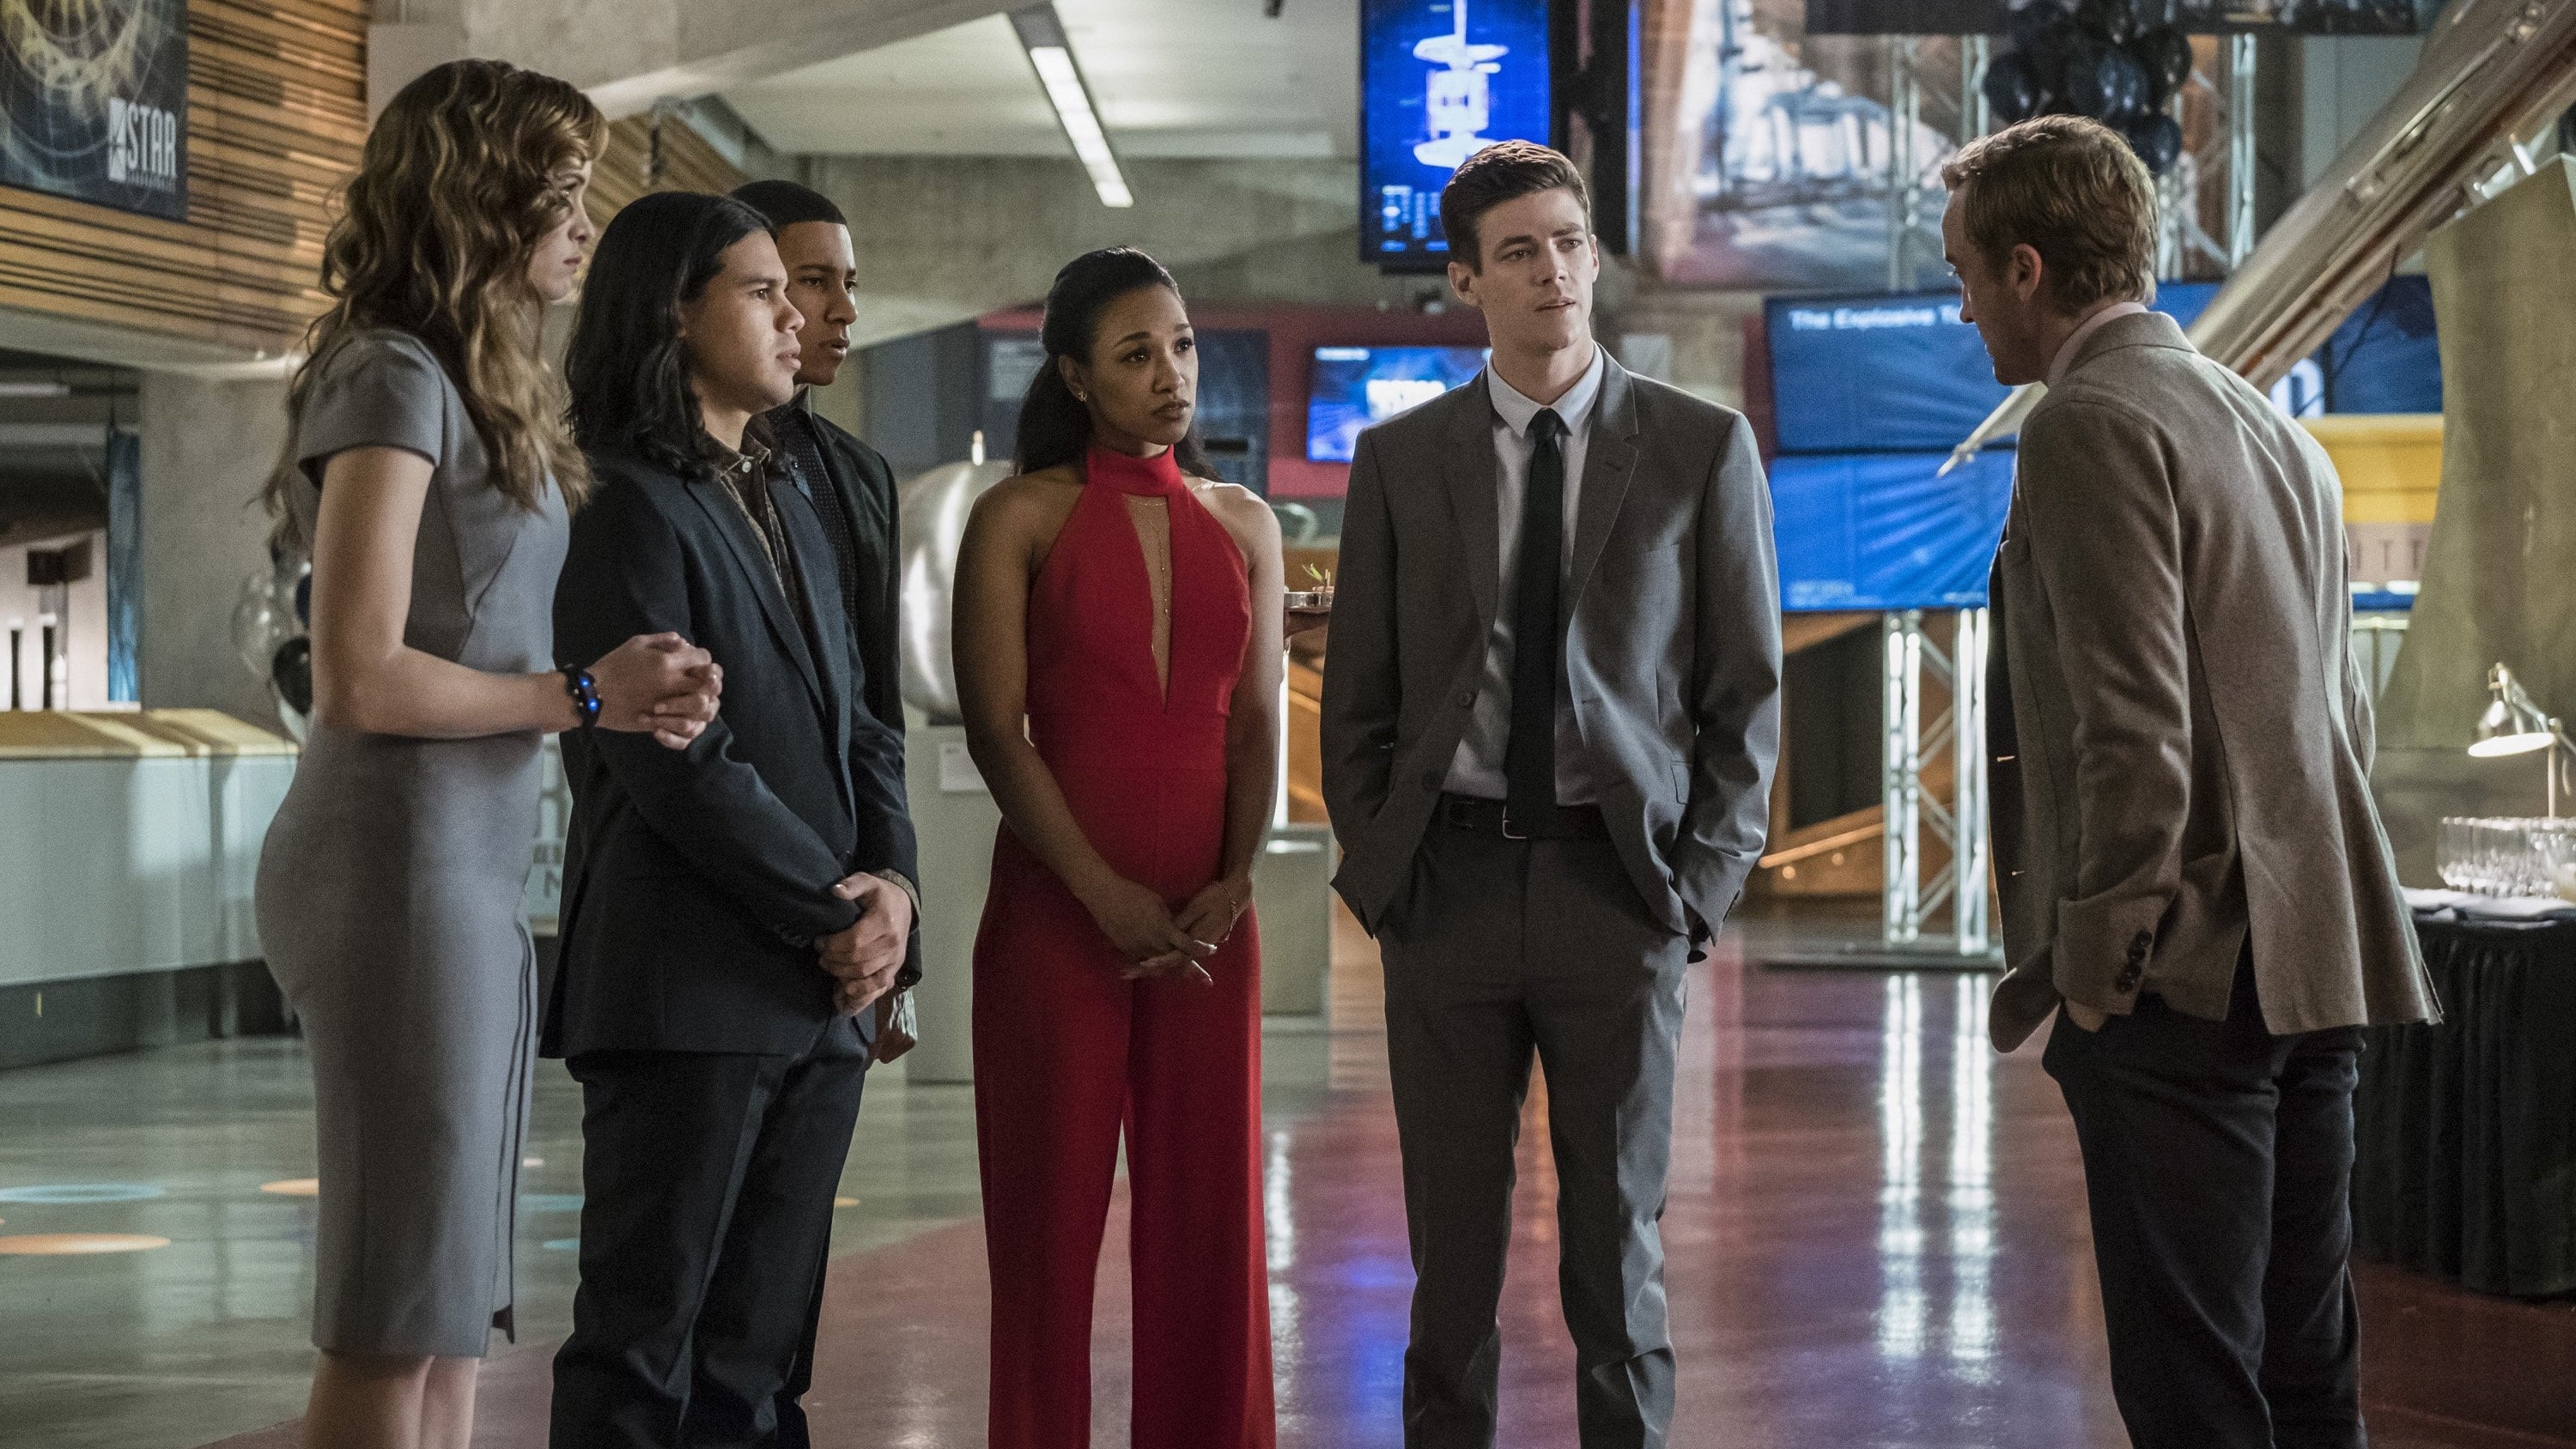 The Flash - Season 3 Episode 10 : Borrowing Problems From The Future